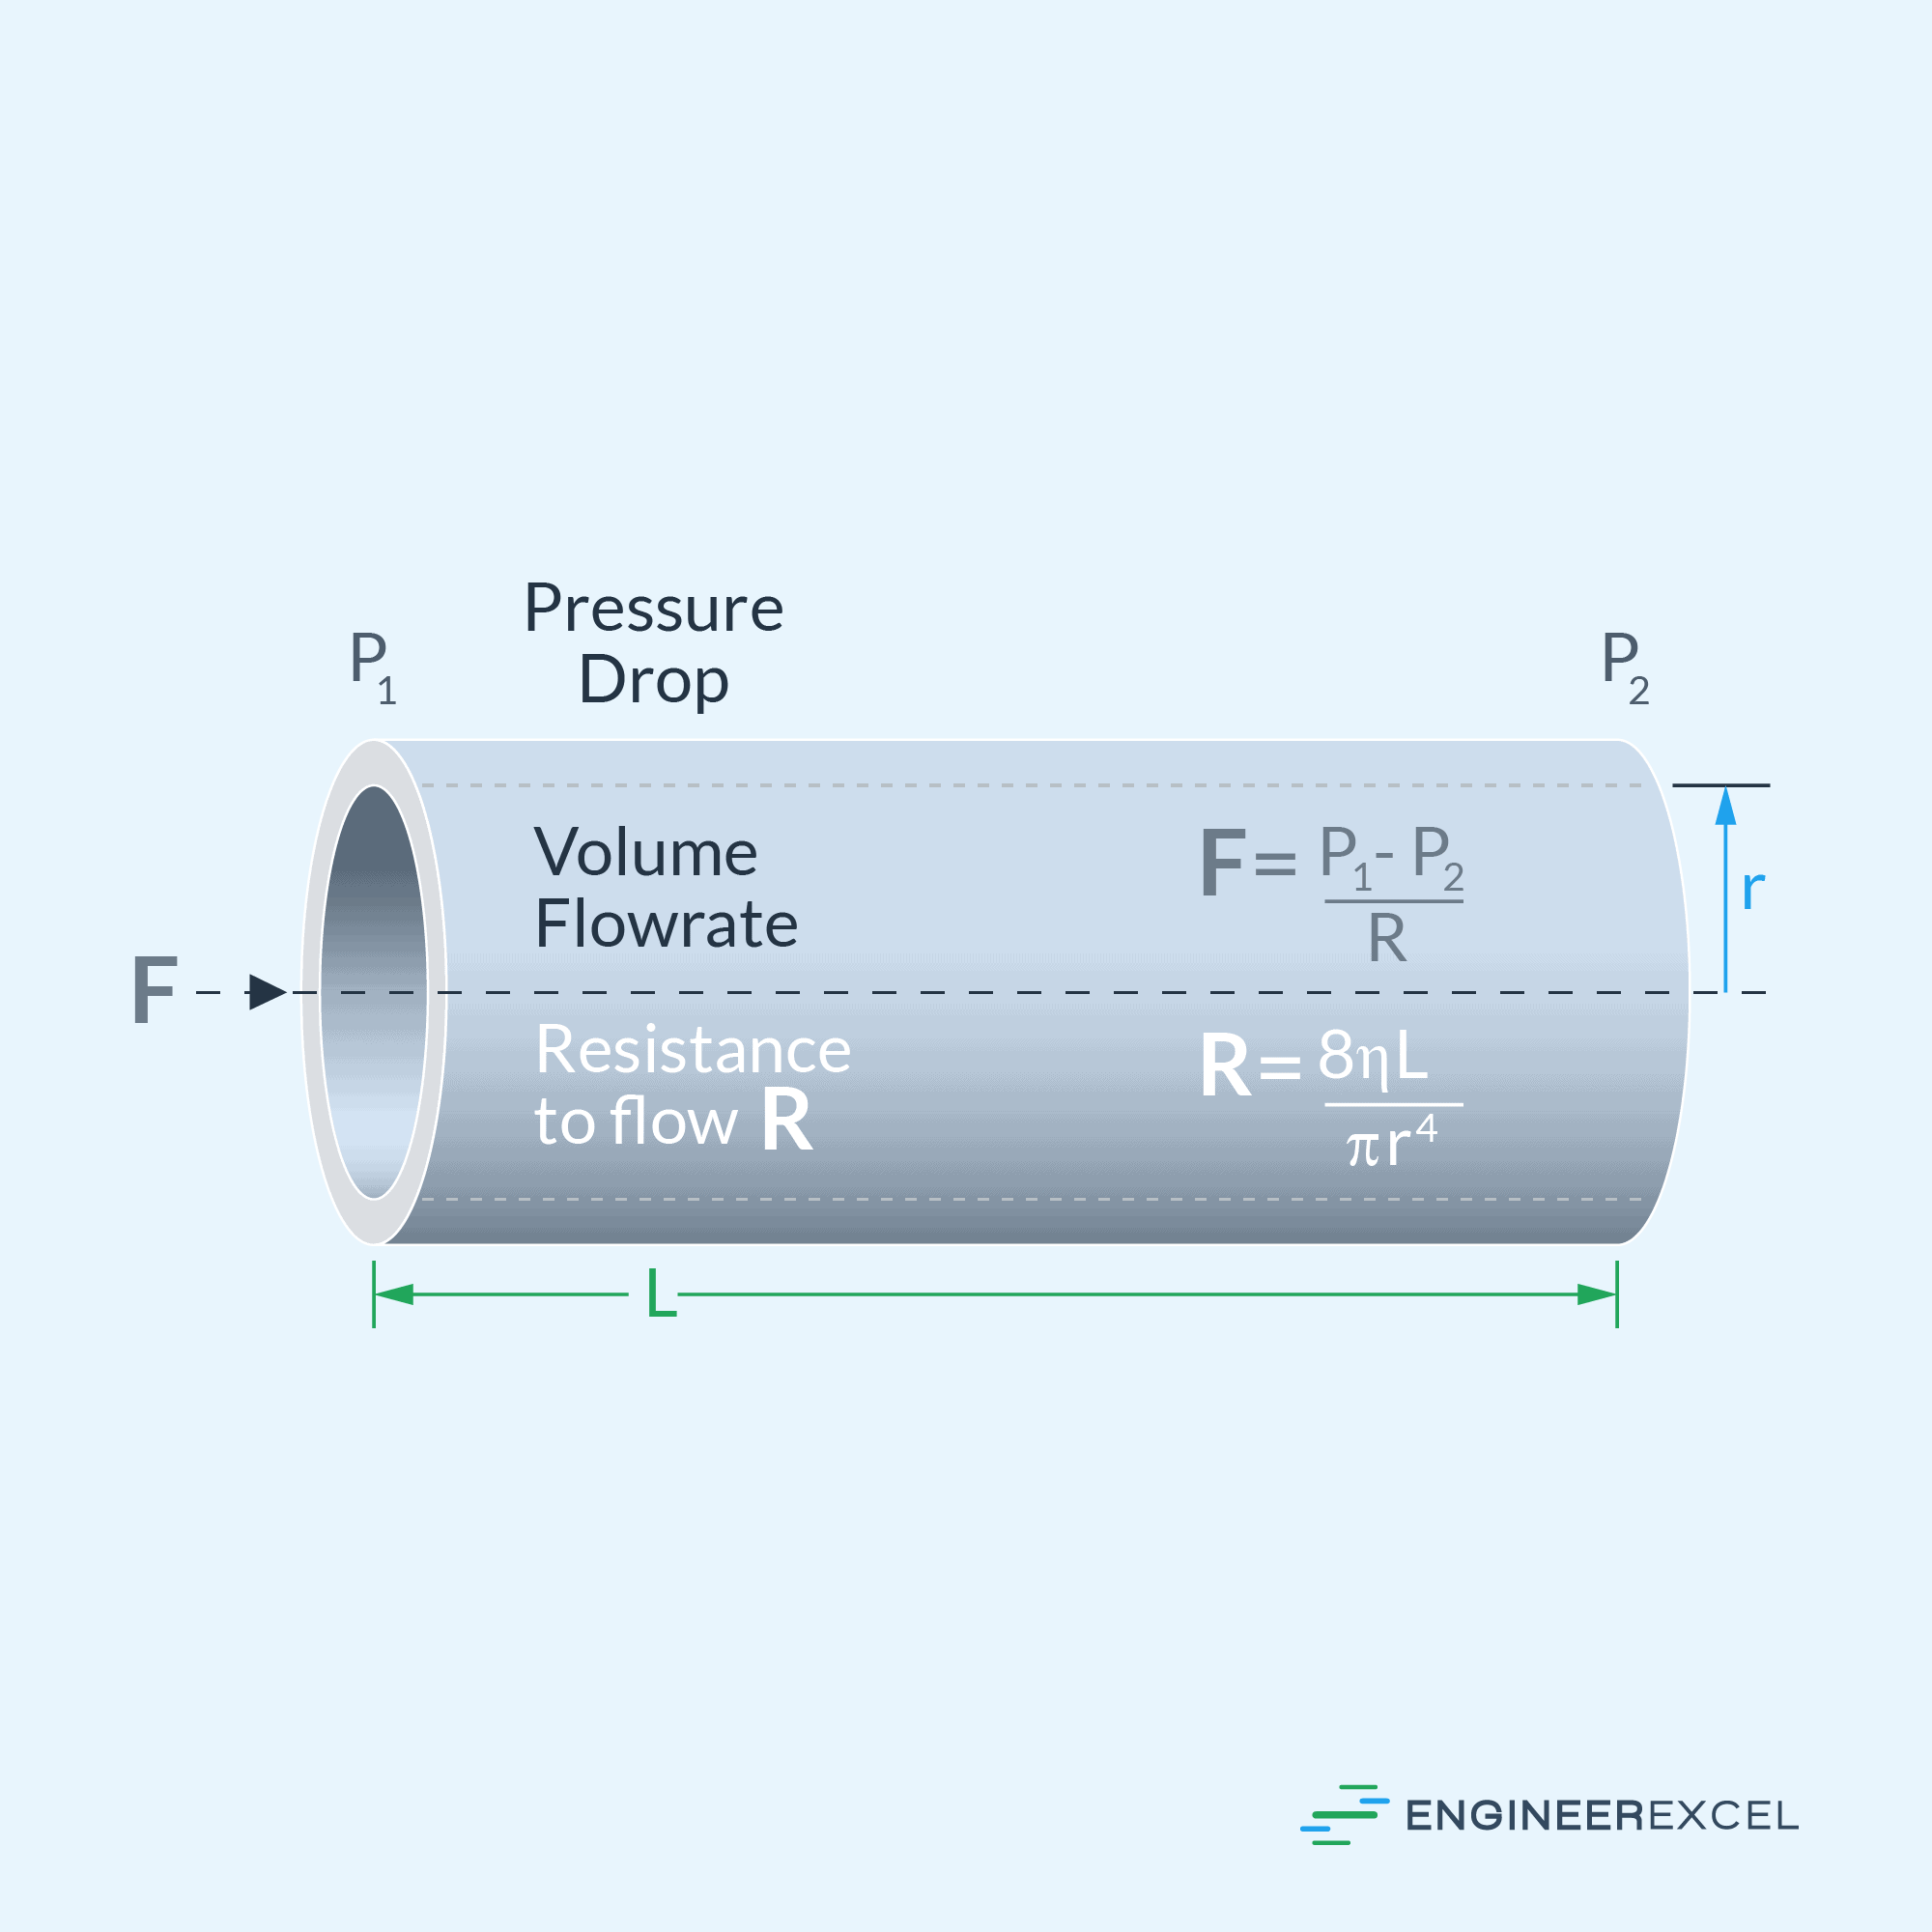 Horizontal flow of a viscous fluid due to pressure difference